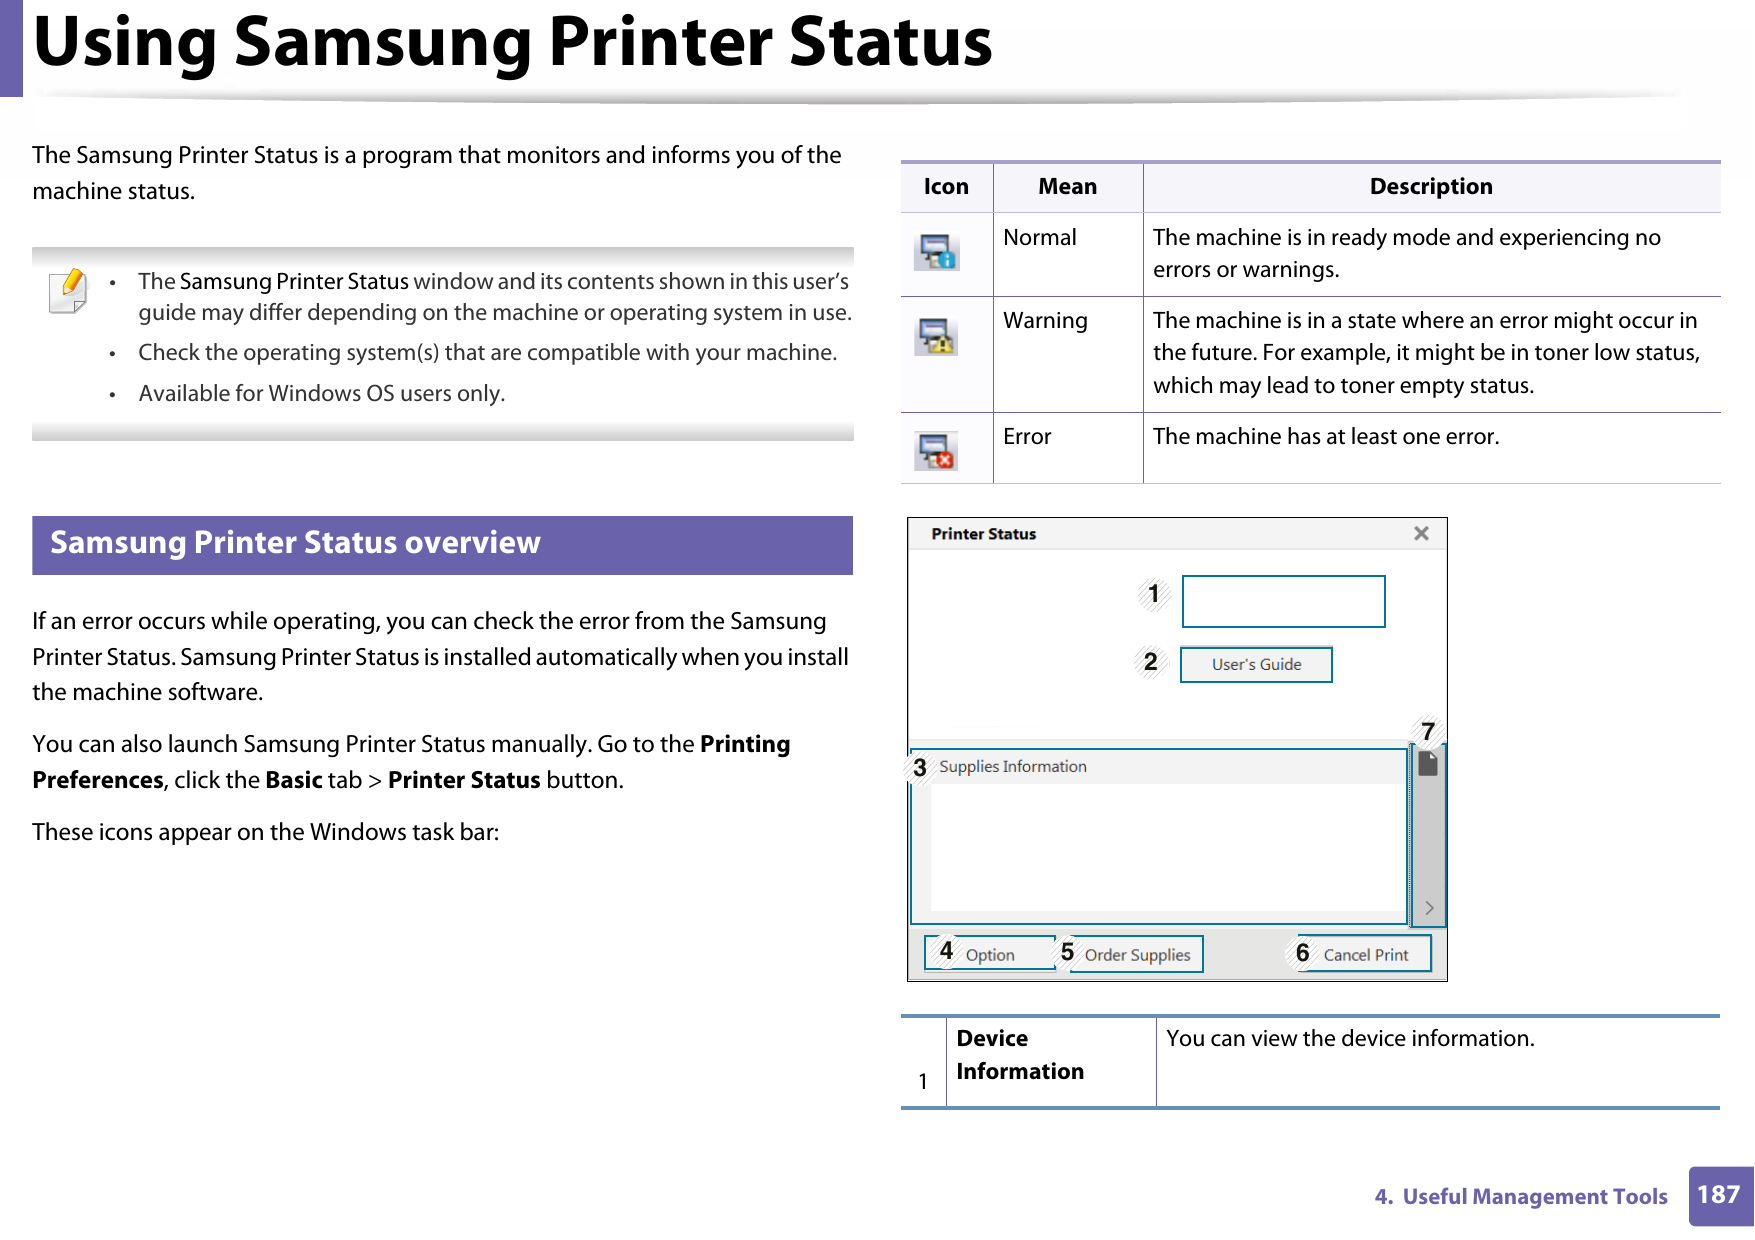 1874.  Useful Management ToolsUsing Samsung Printer Status The Samsung Printer Status is a program that monitors and informs you of the machine status.  • The Samsung Printer Status window and its contents shown in this user’s guide may differ depending on the machine or operating system in use.• Check the operating system(s) that are compatible with your machine.• Available for Windows OS users only. 5 Samsung Printer Status overviewIf an error occurs while operating, you can check the error from the Samsung Printer Status. Samsung Printer Status is installed automatically when you install the machine software. You can also launch Samsung Printer Status manually. Go to the Printing Preferences, click the Basic tab &gt; Printer Status button.These icons appear on the Windows task bar:Icon Mean DescriptionNormal The machine is in ready mode and experiencing no errors or warnings.Warning The machine is in a state where an error might occur in the future. For example, it might be in toner low status, which may lead to toner empty status. Error The machine has at least one error.1Device InformationYou can view the device information.1327456